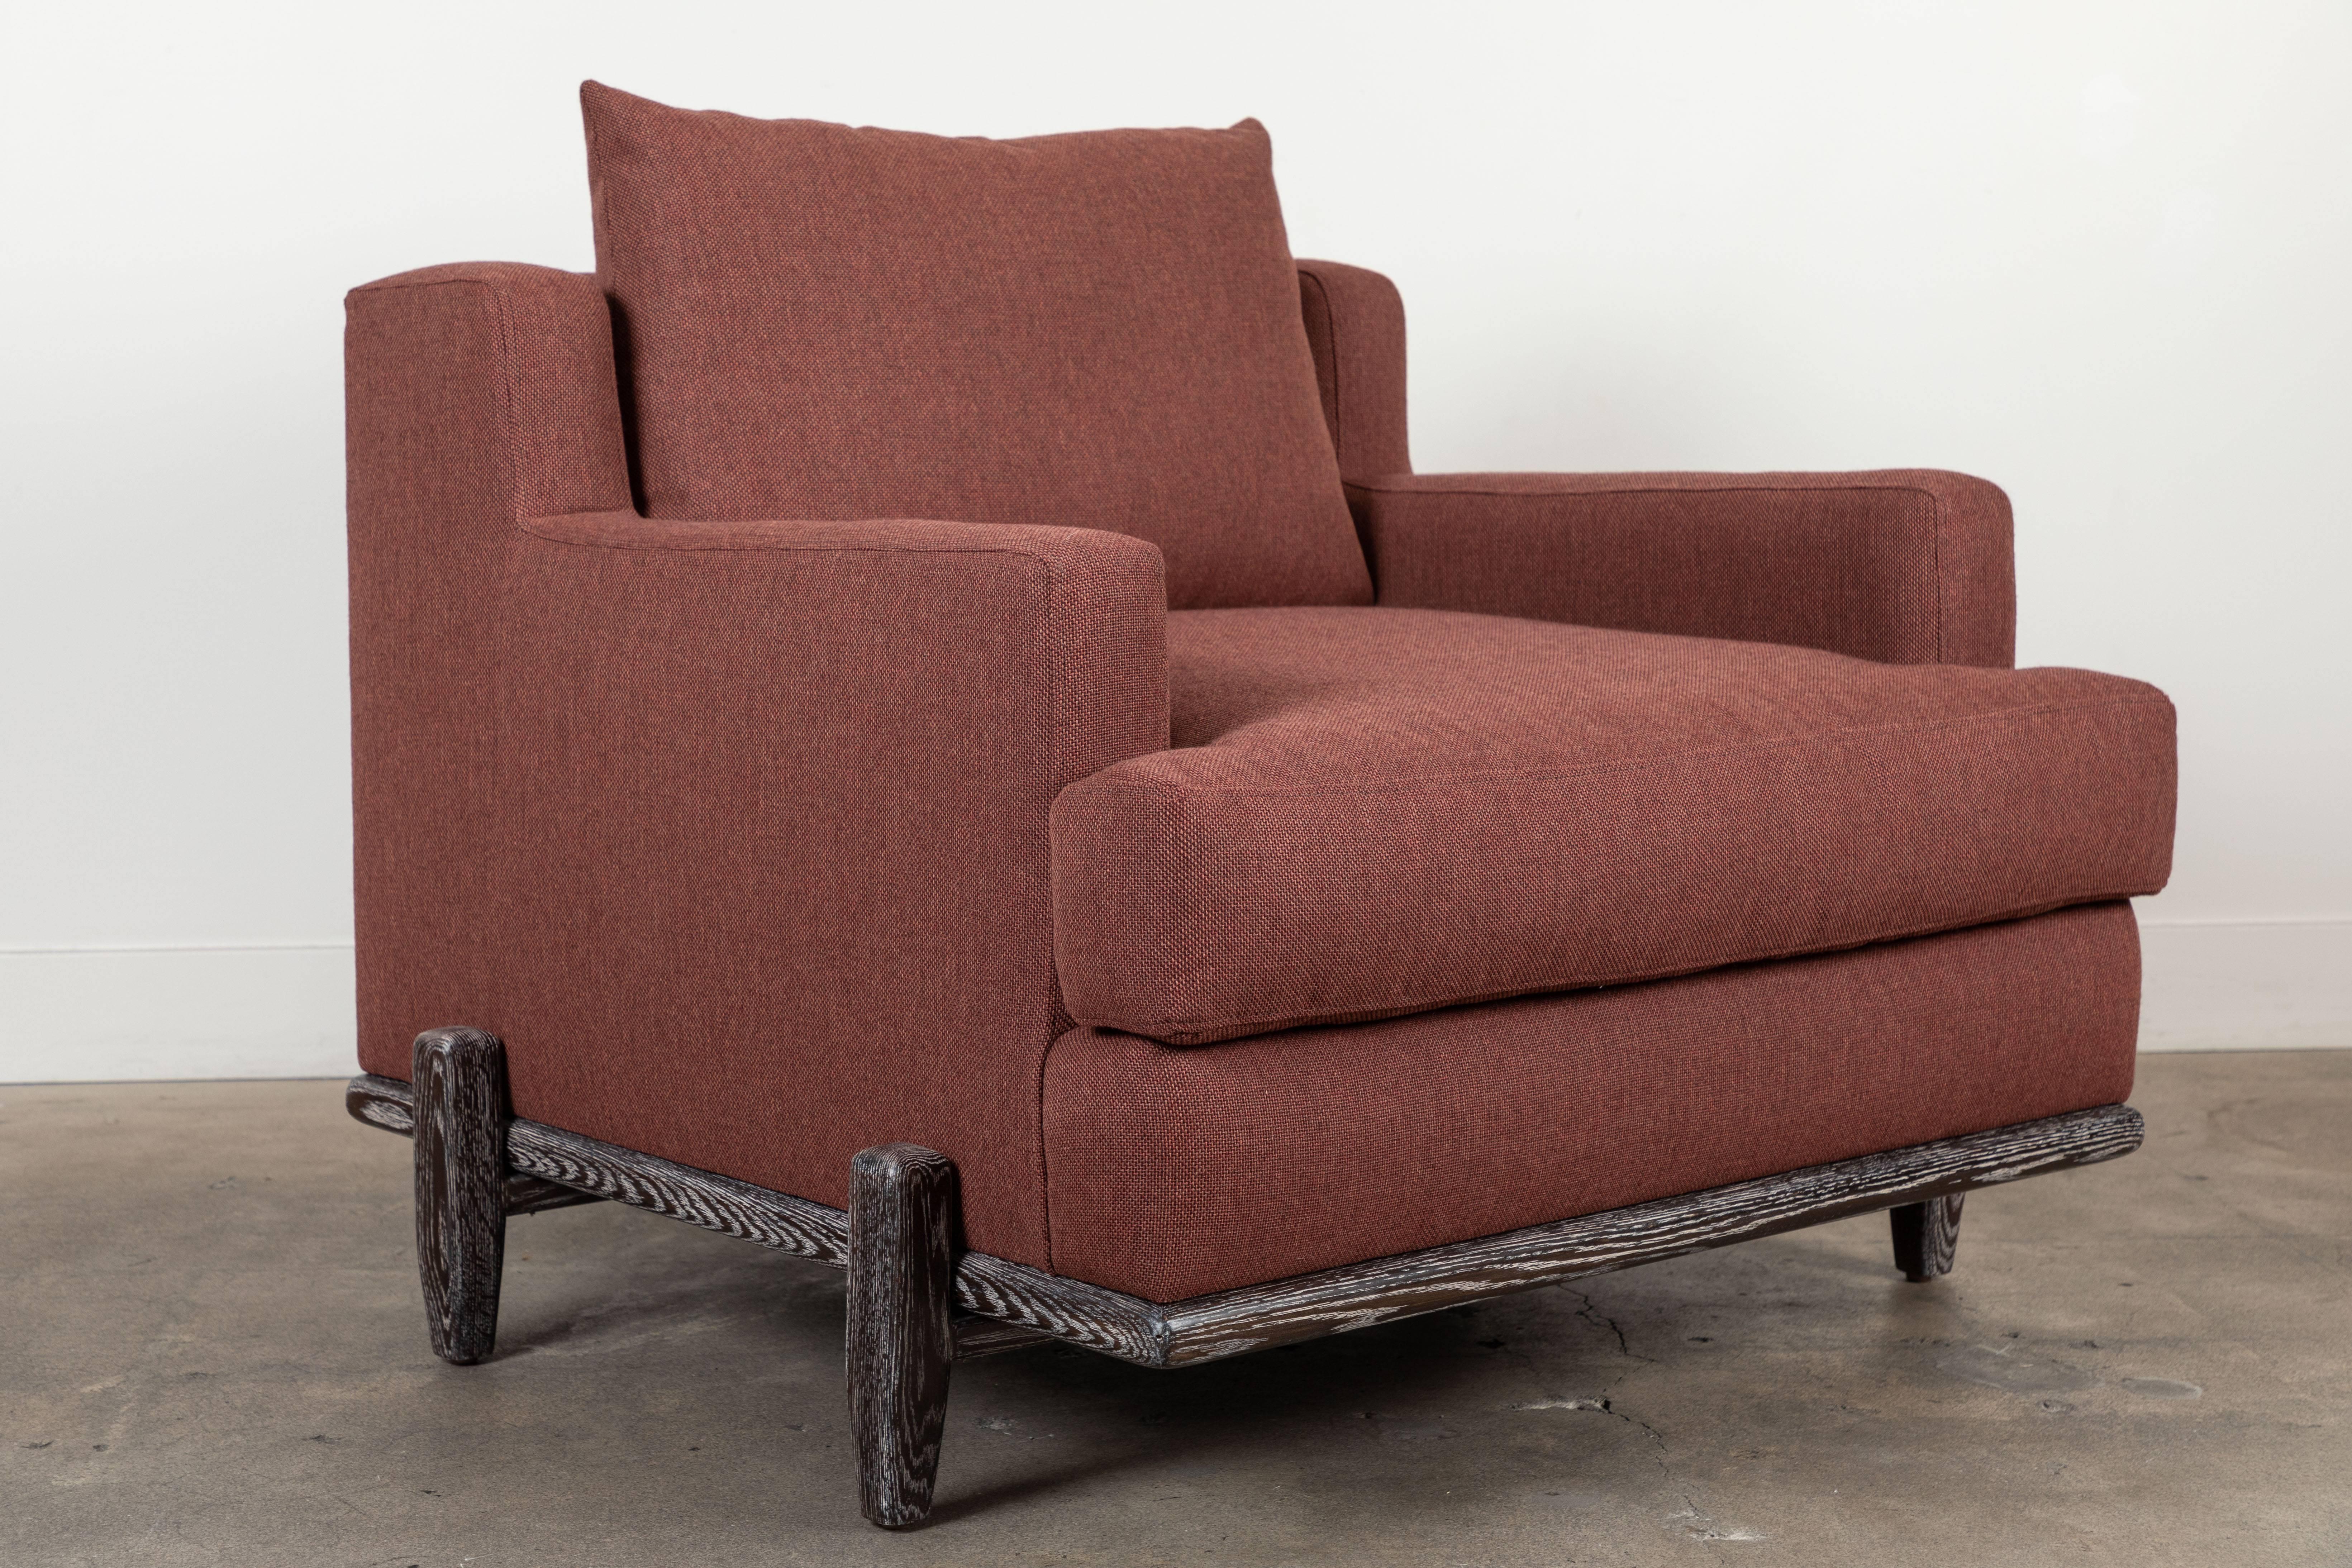 American George Chair by Brian Paquette for Lawson-Fenning